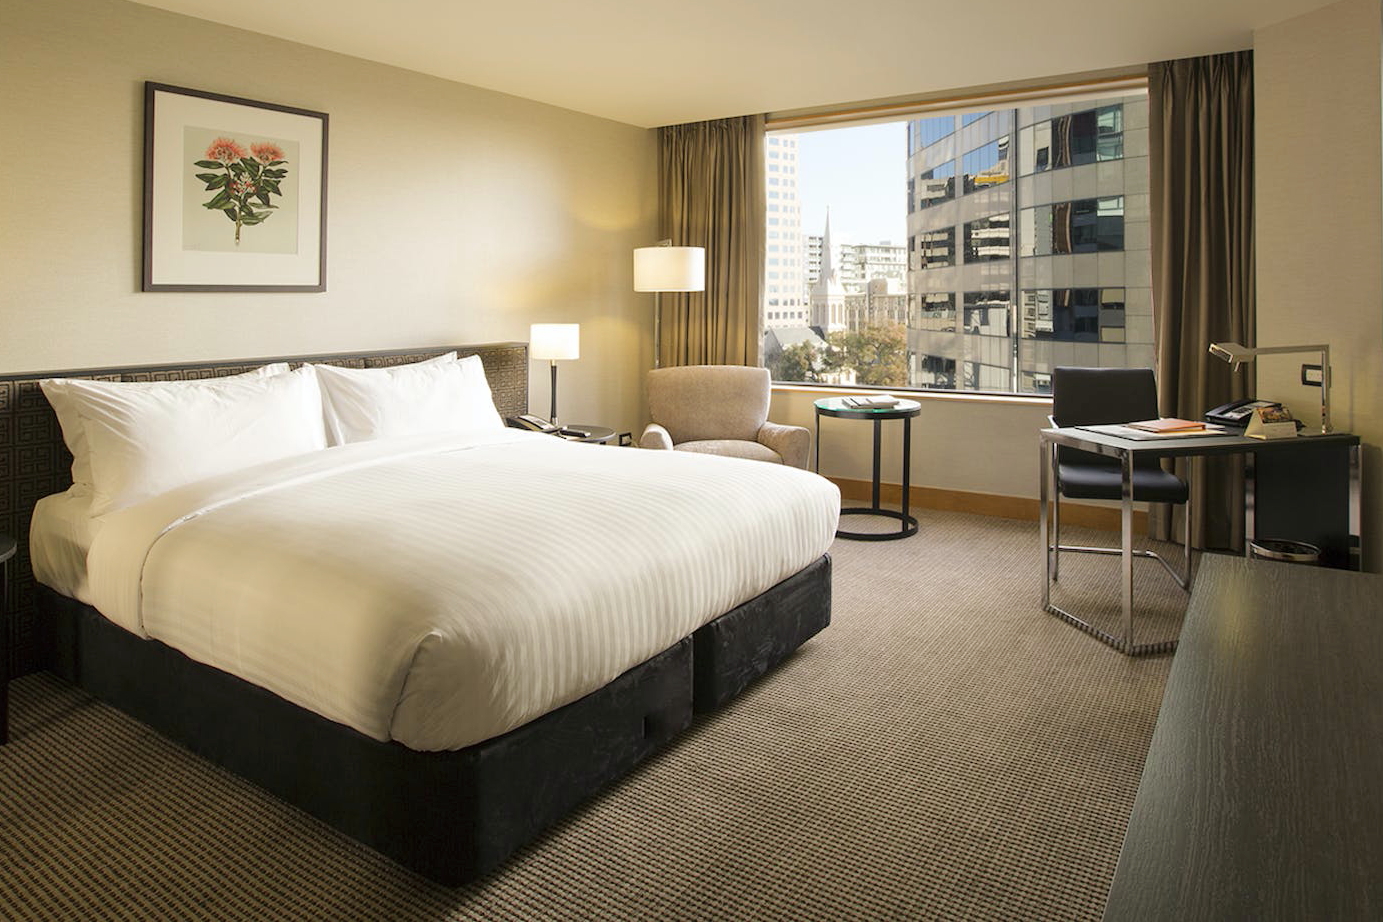 Superior Room at Stamford Plaza Auckland. Click to enlarge.